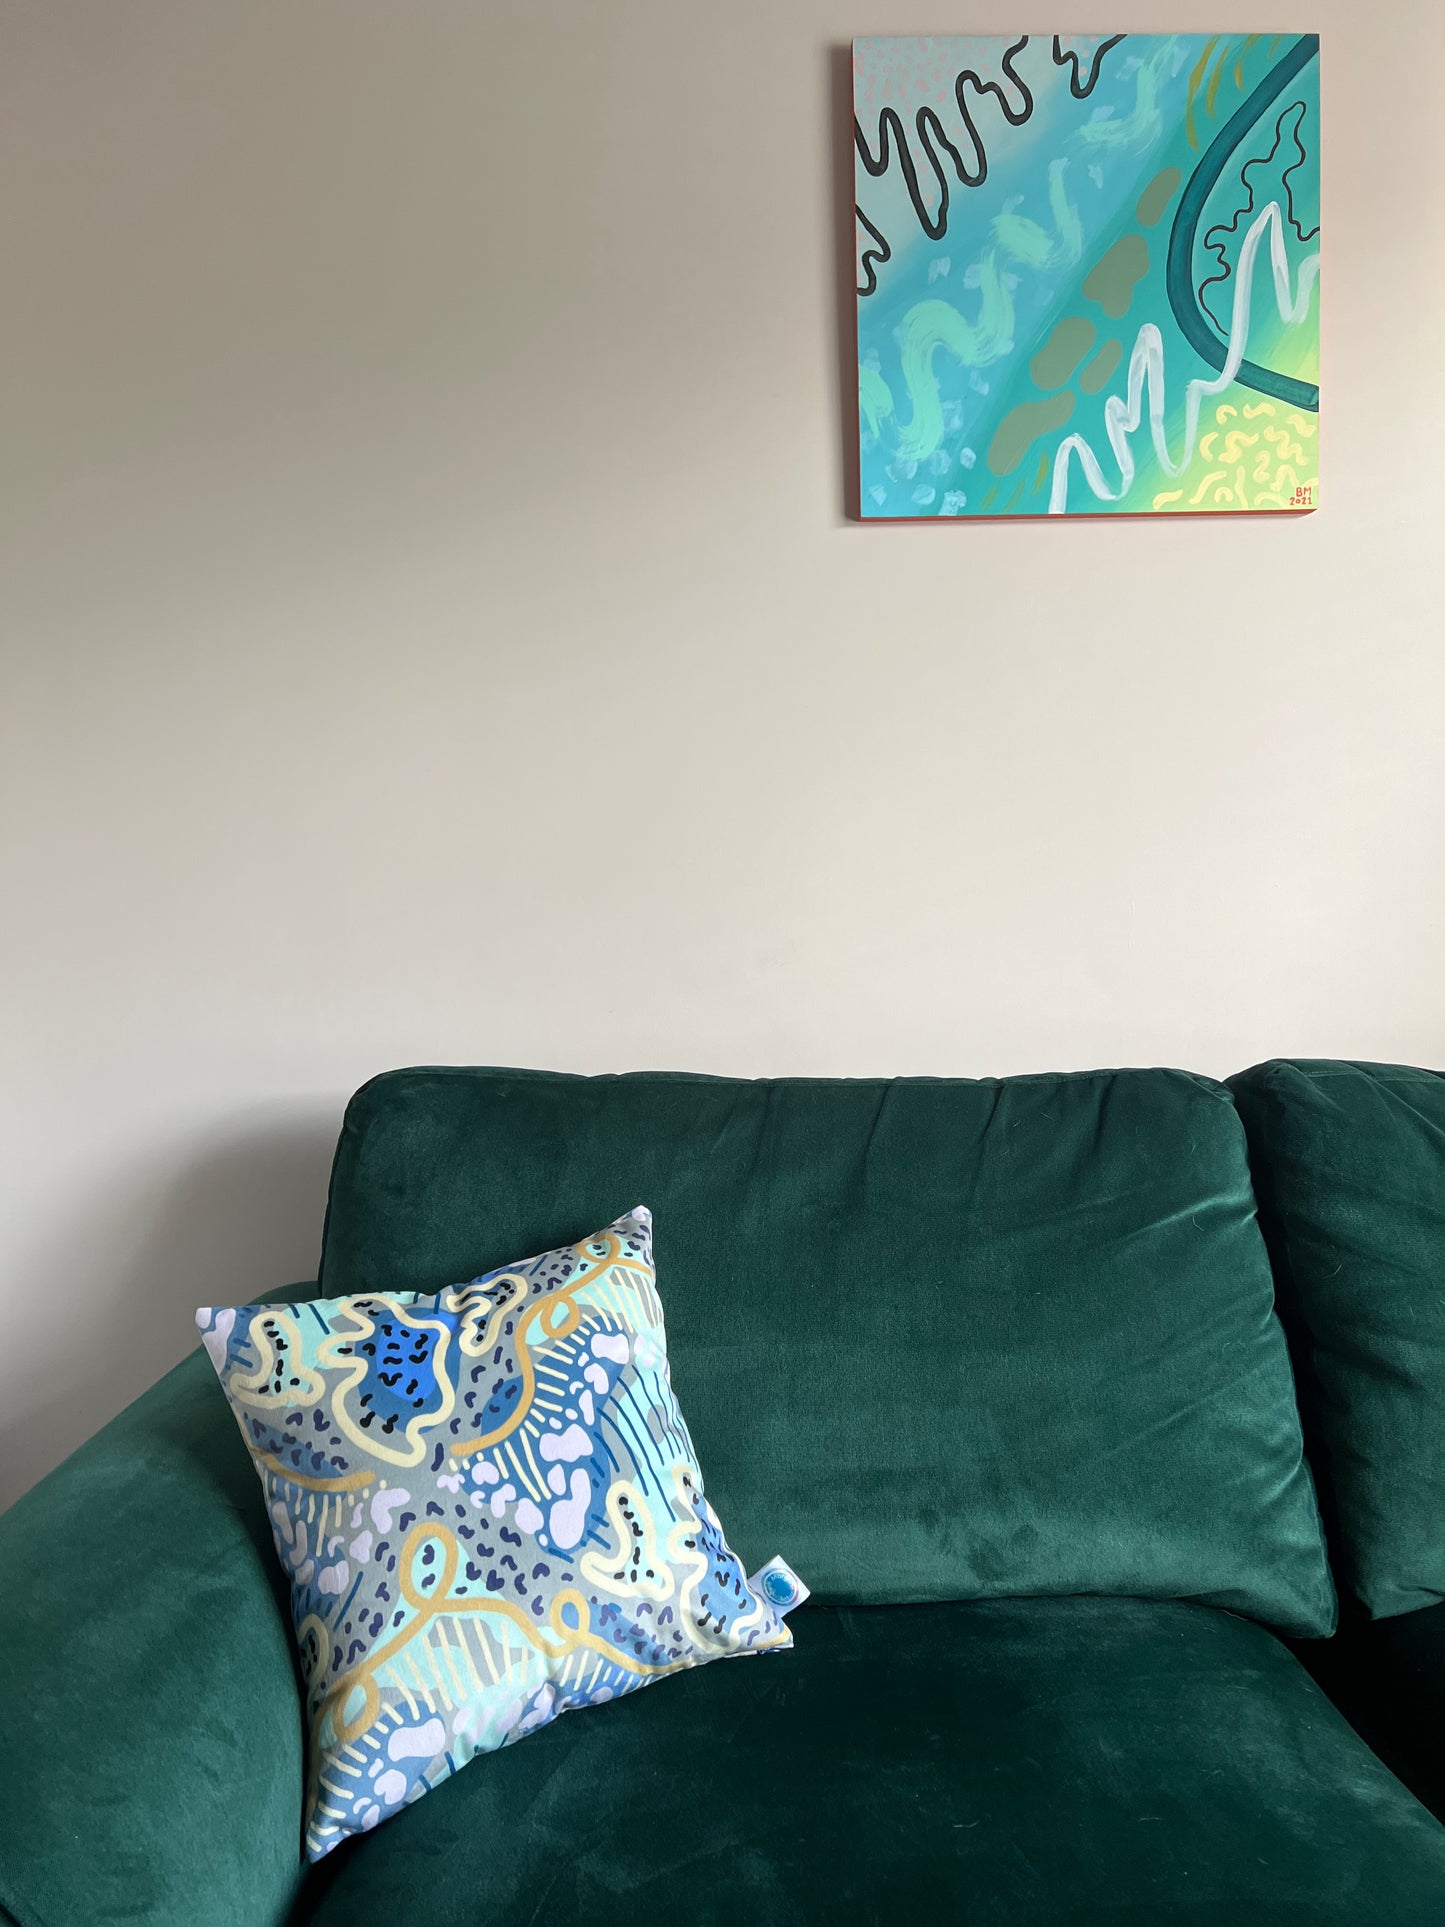 A statement cushion made up of organic shapes and lines in shades of greens, blues and yellows on a deep green sofa with an abstract painting on the wall above.